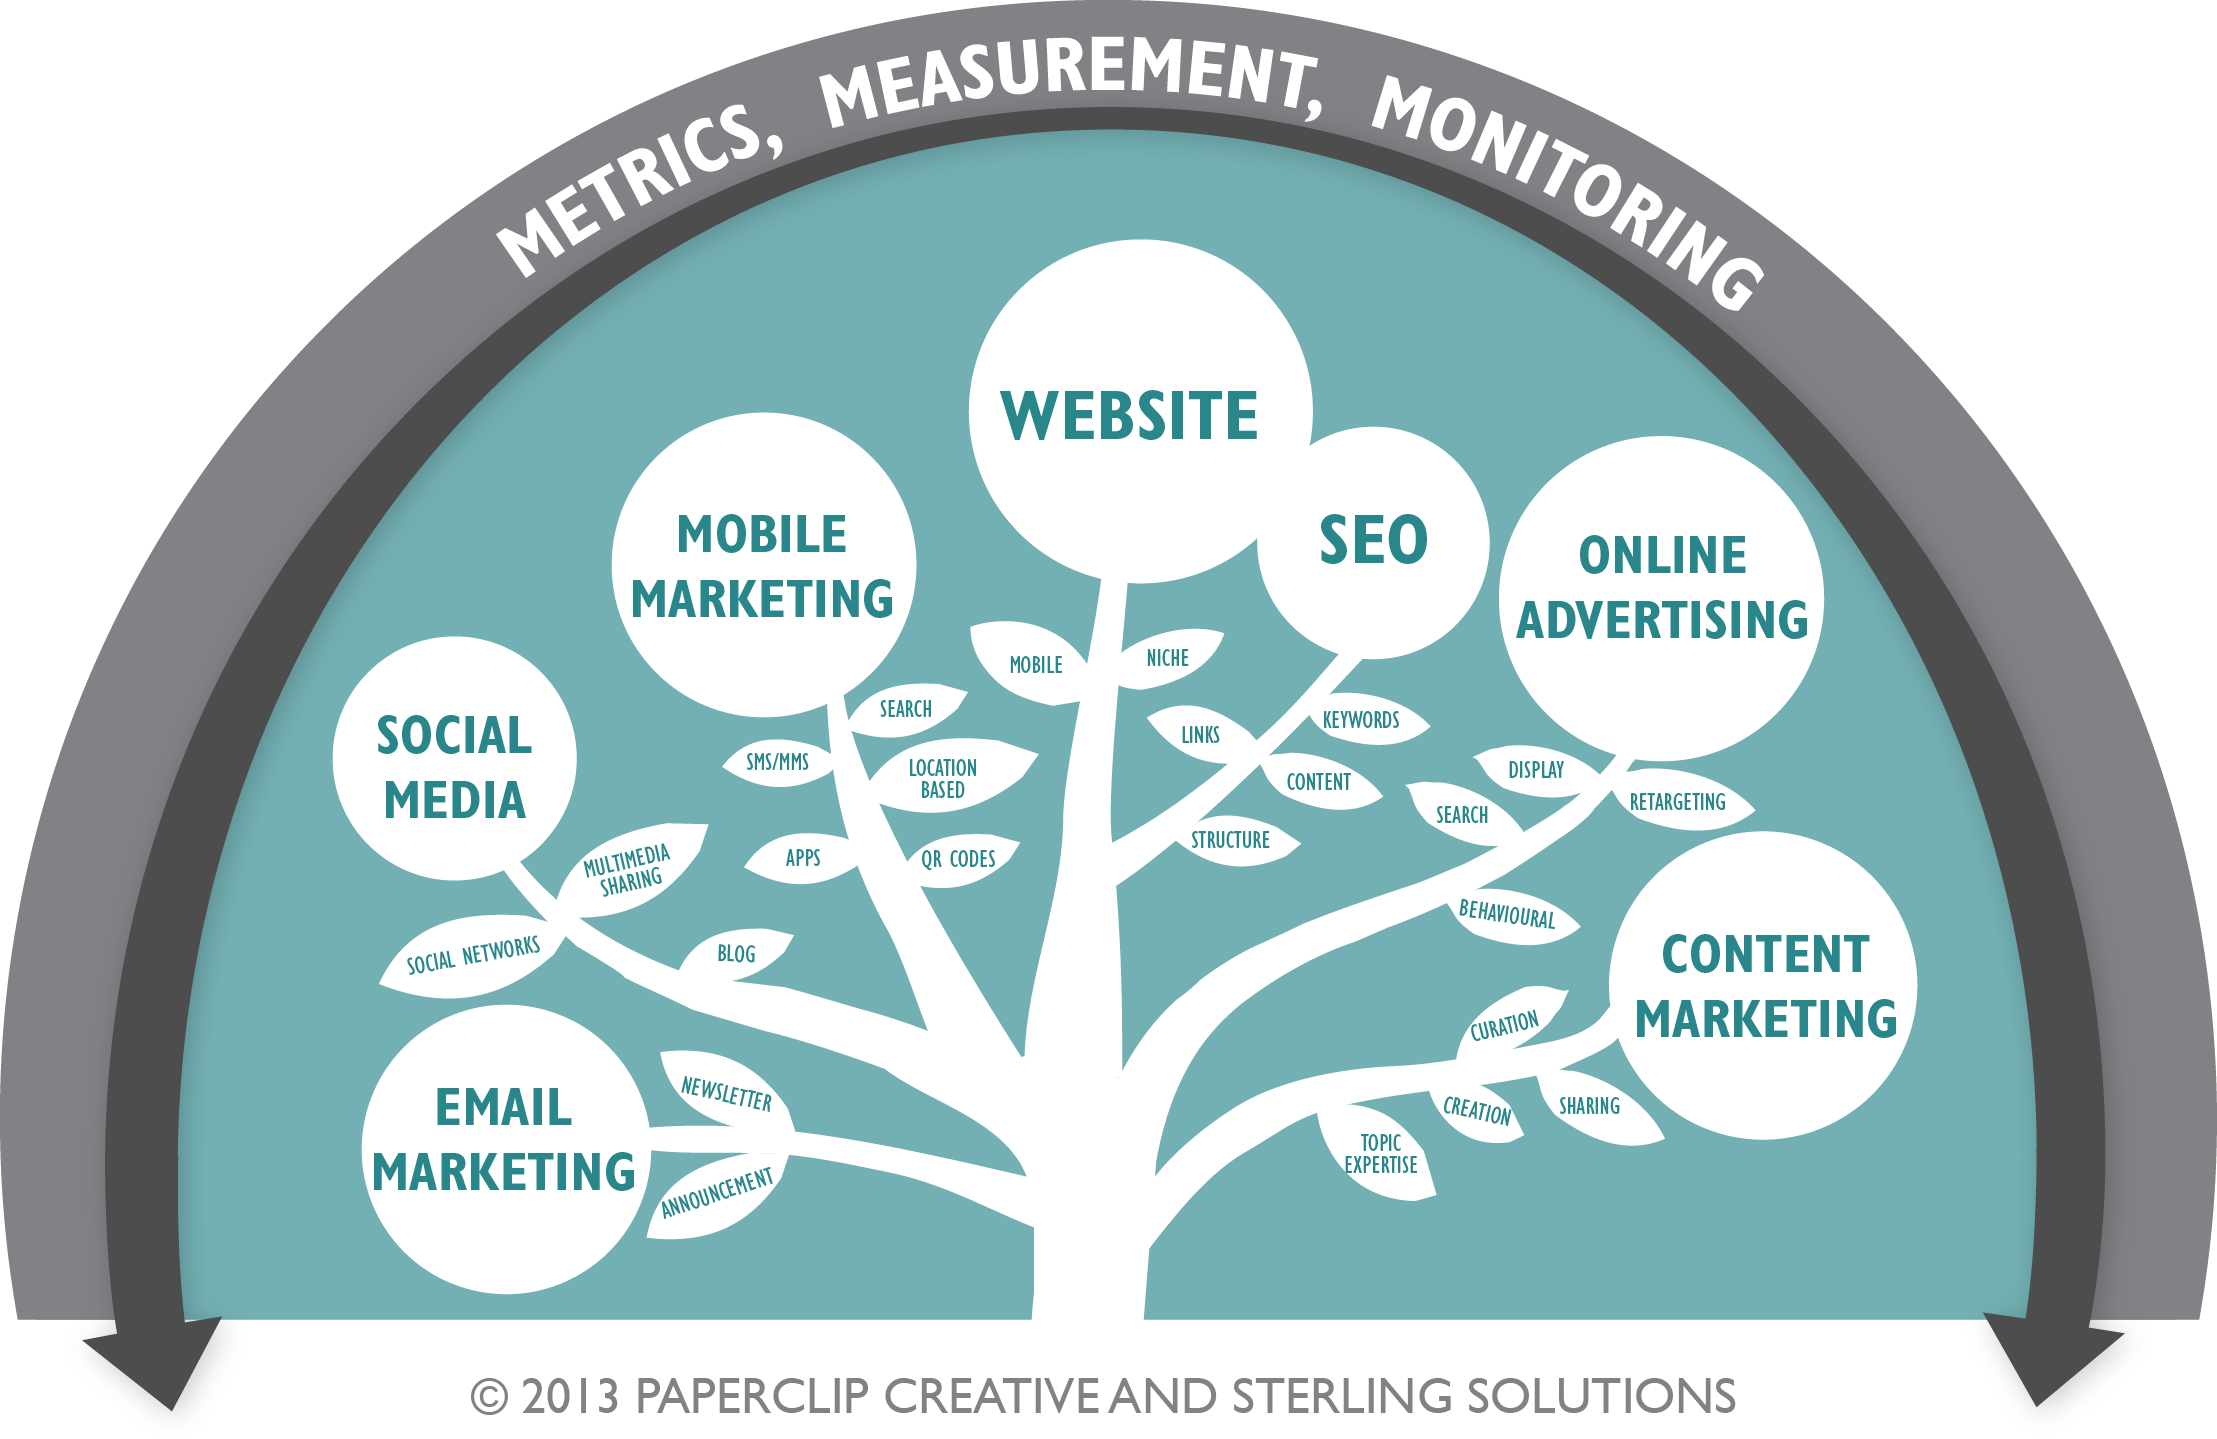 The top of the online marketing tree